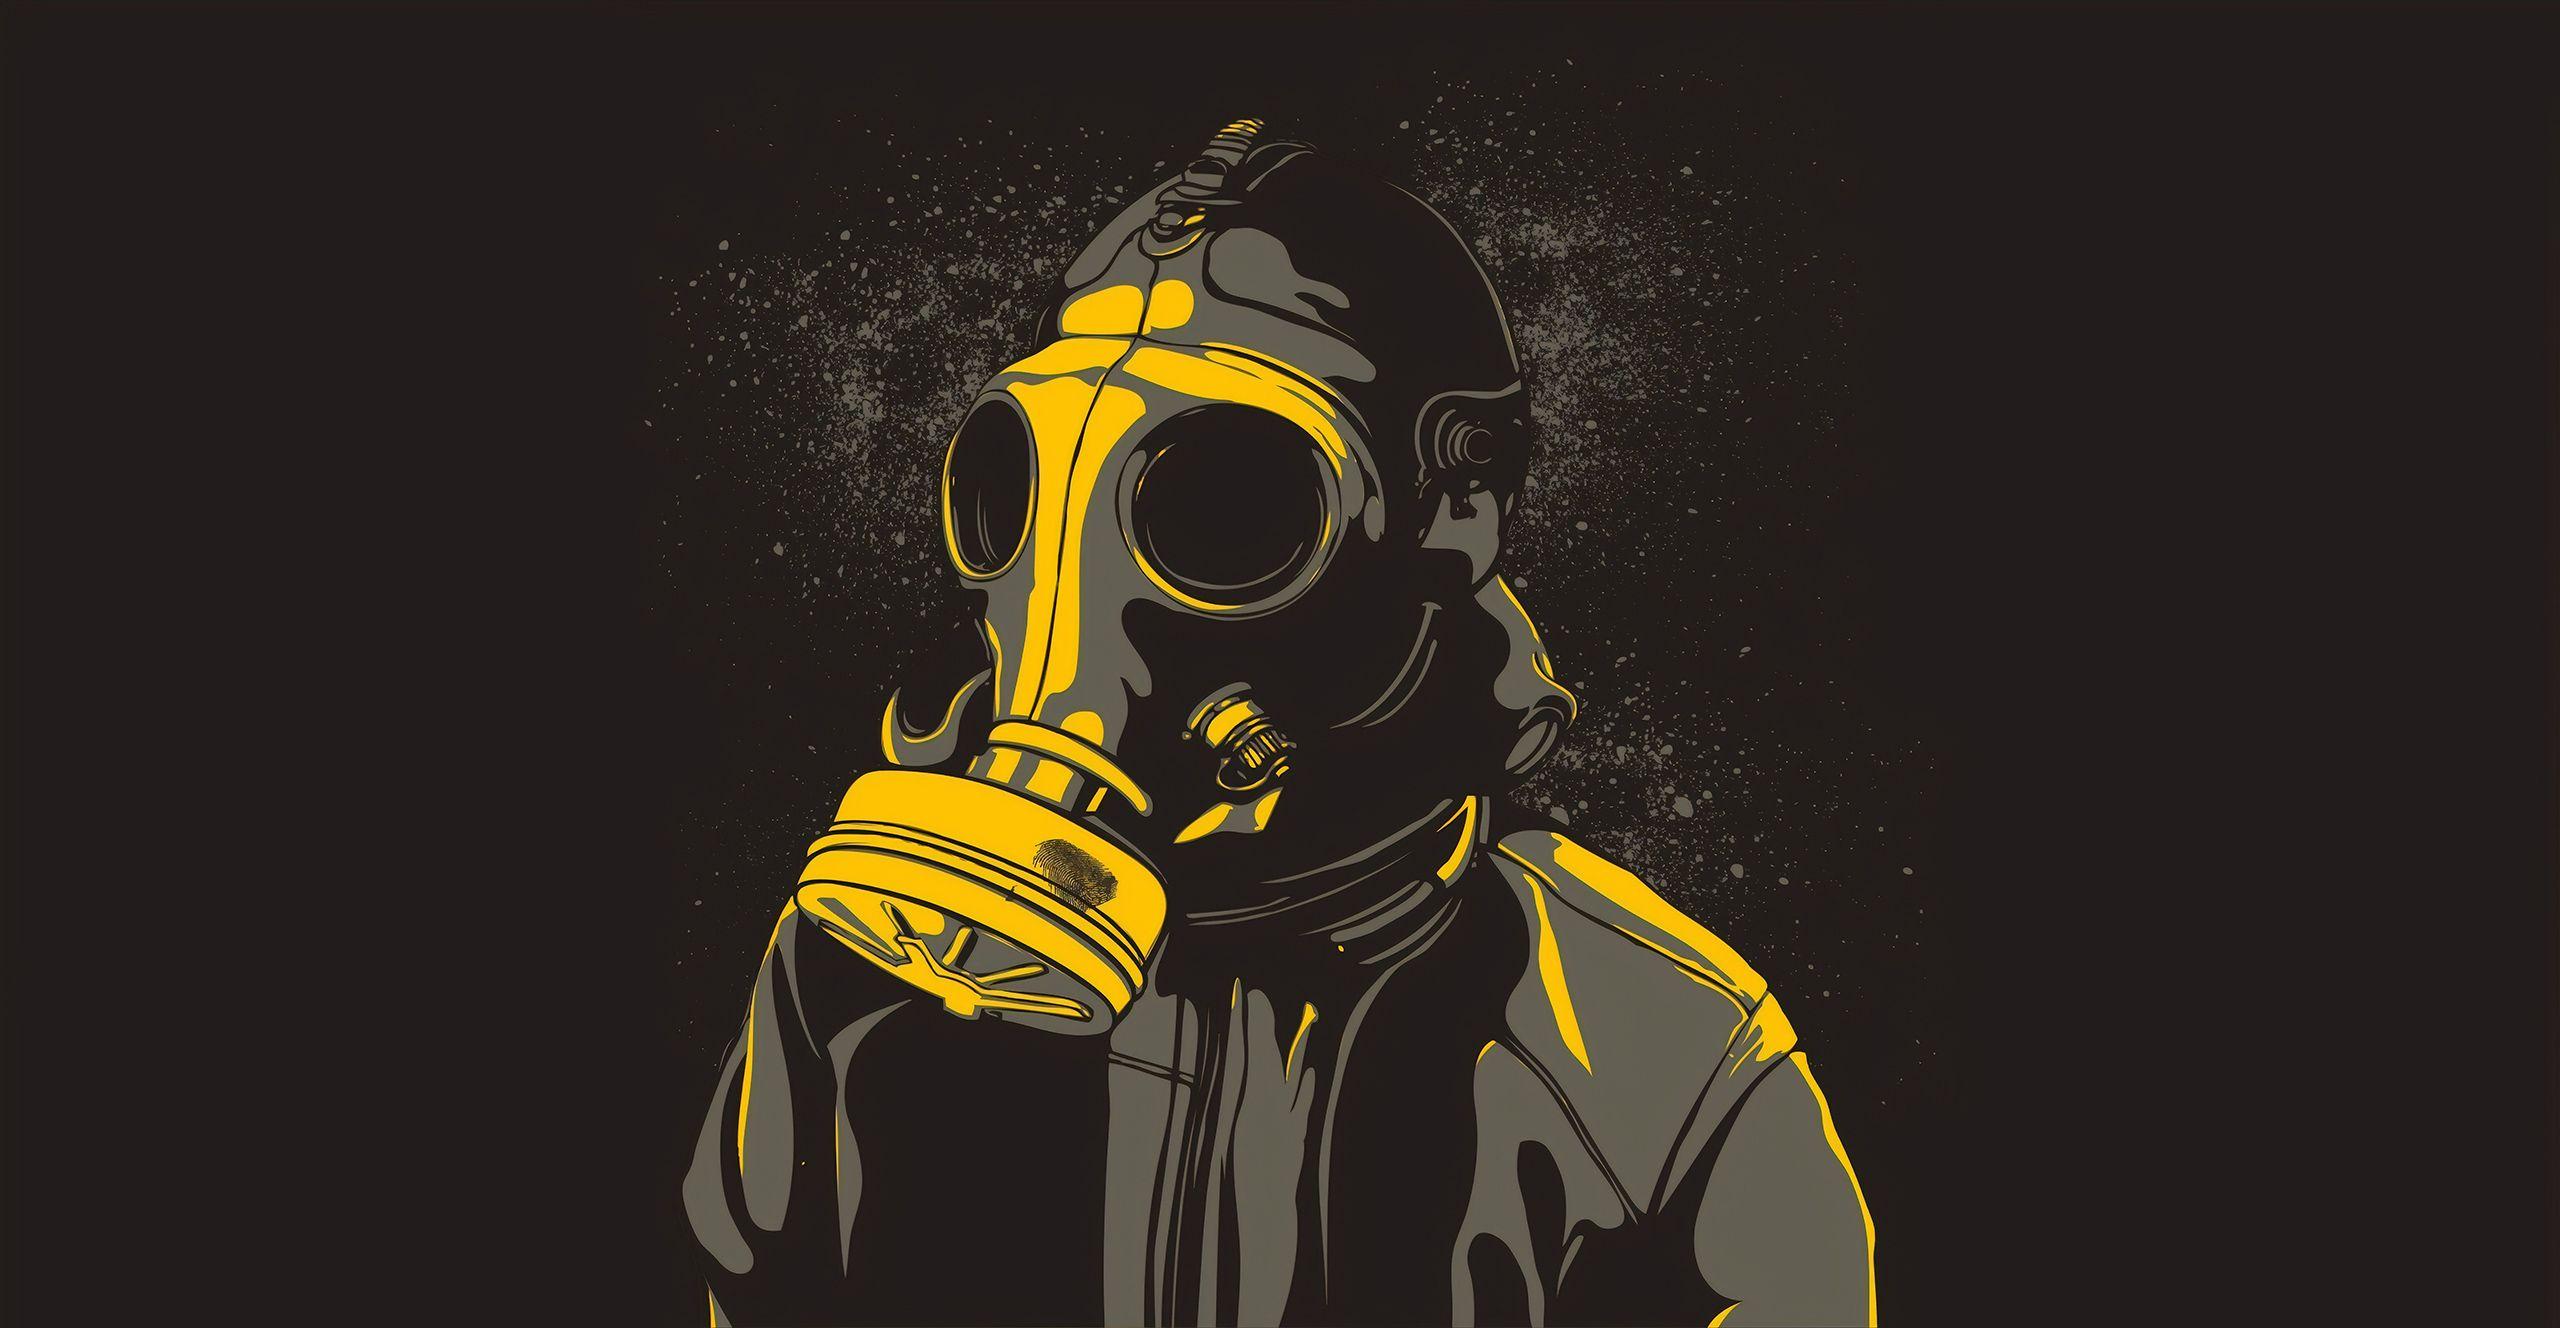 Neon Gas Mask Wallpapers Top Free Neon Gas Mask Backgrounds Wallpaperaccess 7693